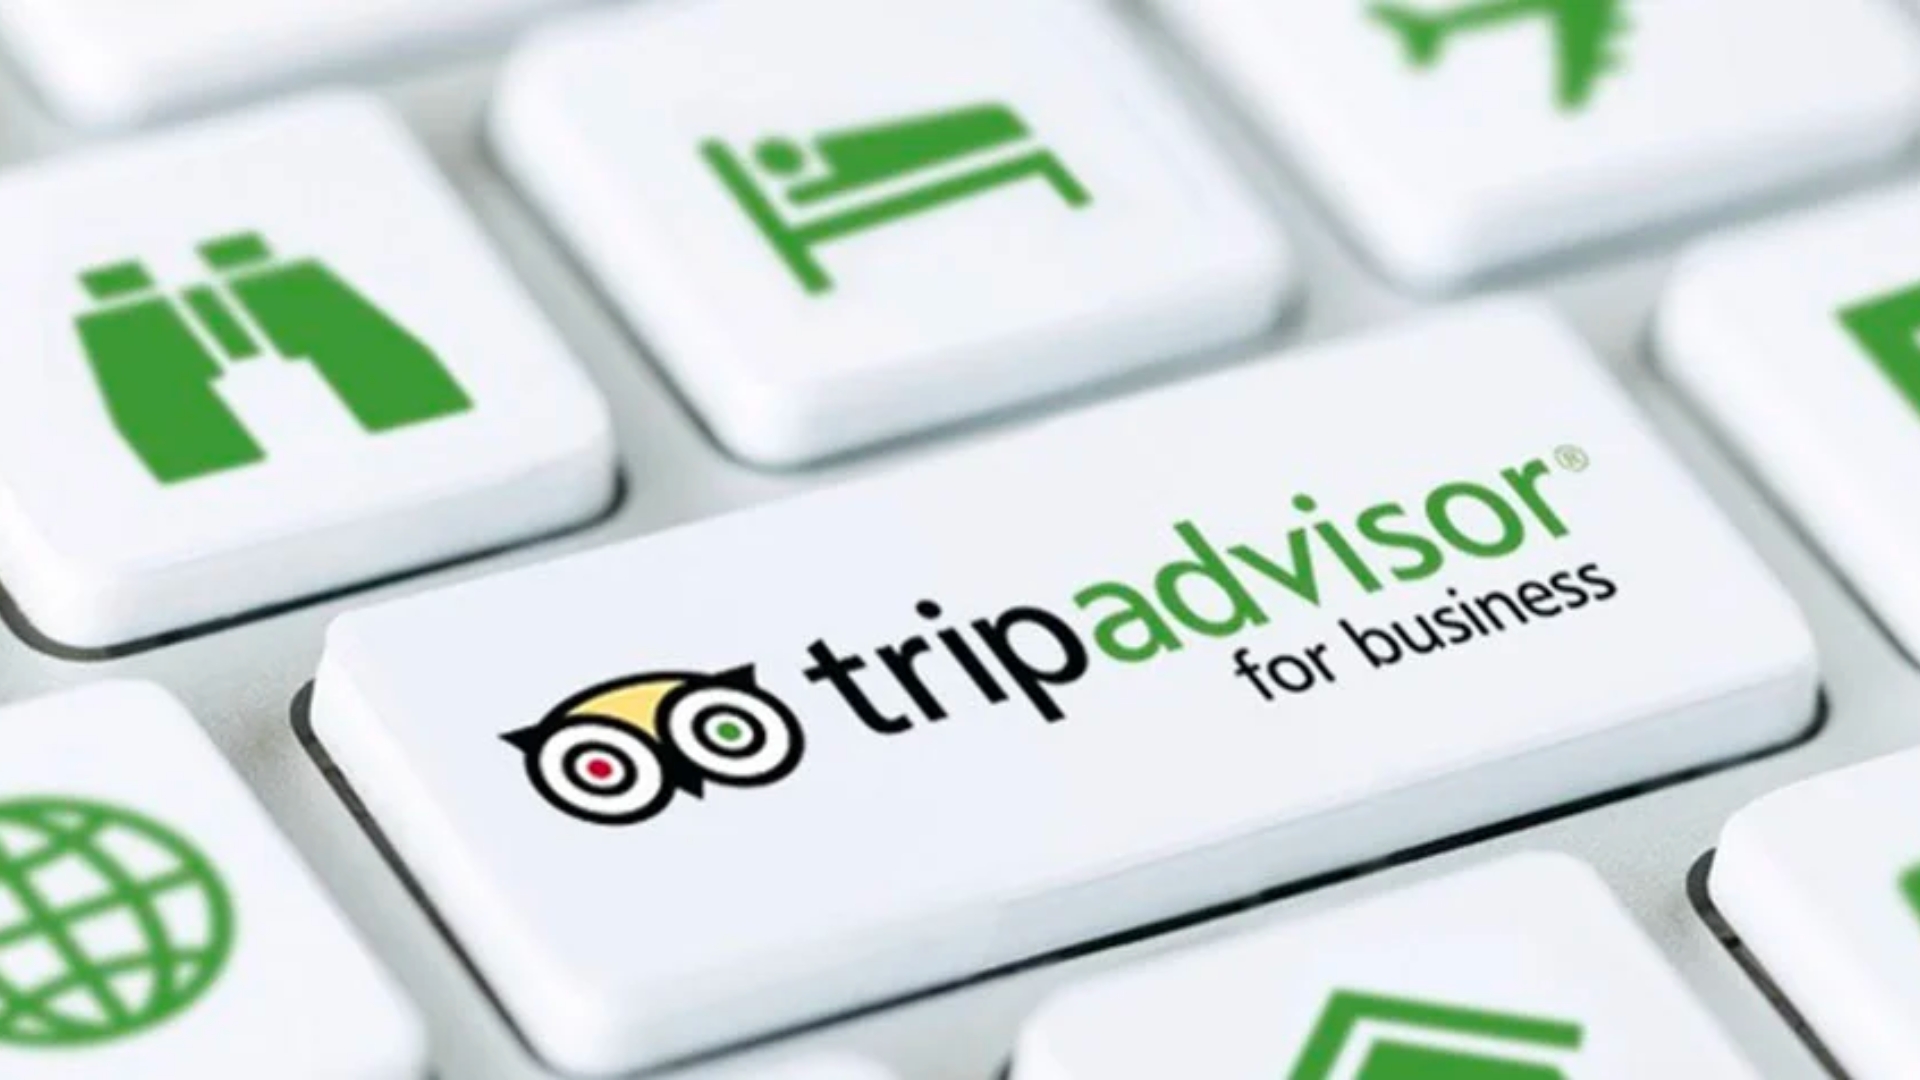 tripadvisor logo on the white keyboard and hotel amenities icons in green color around it